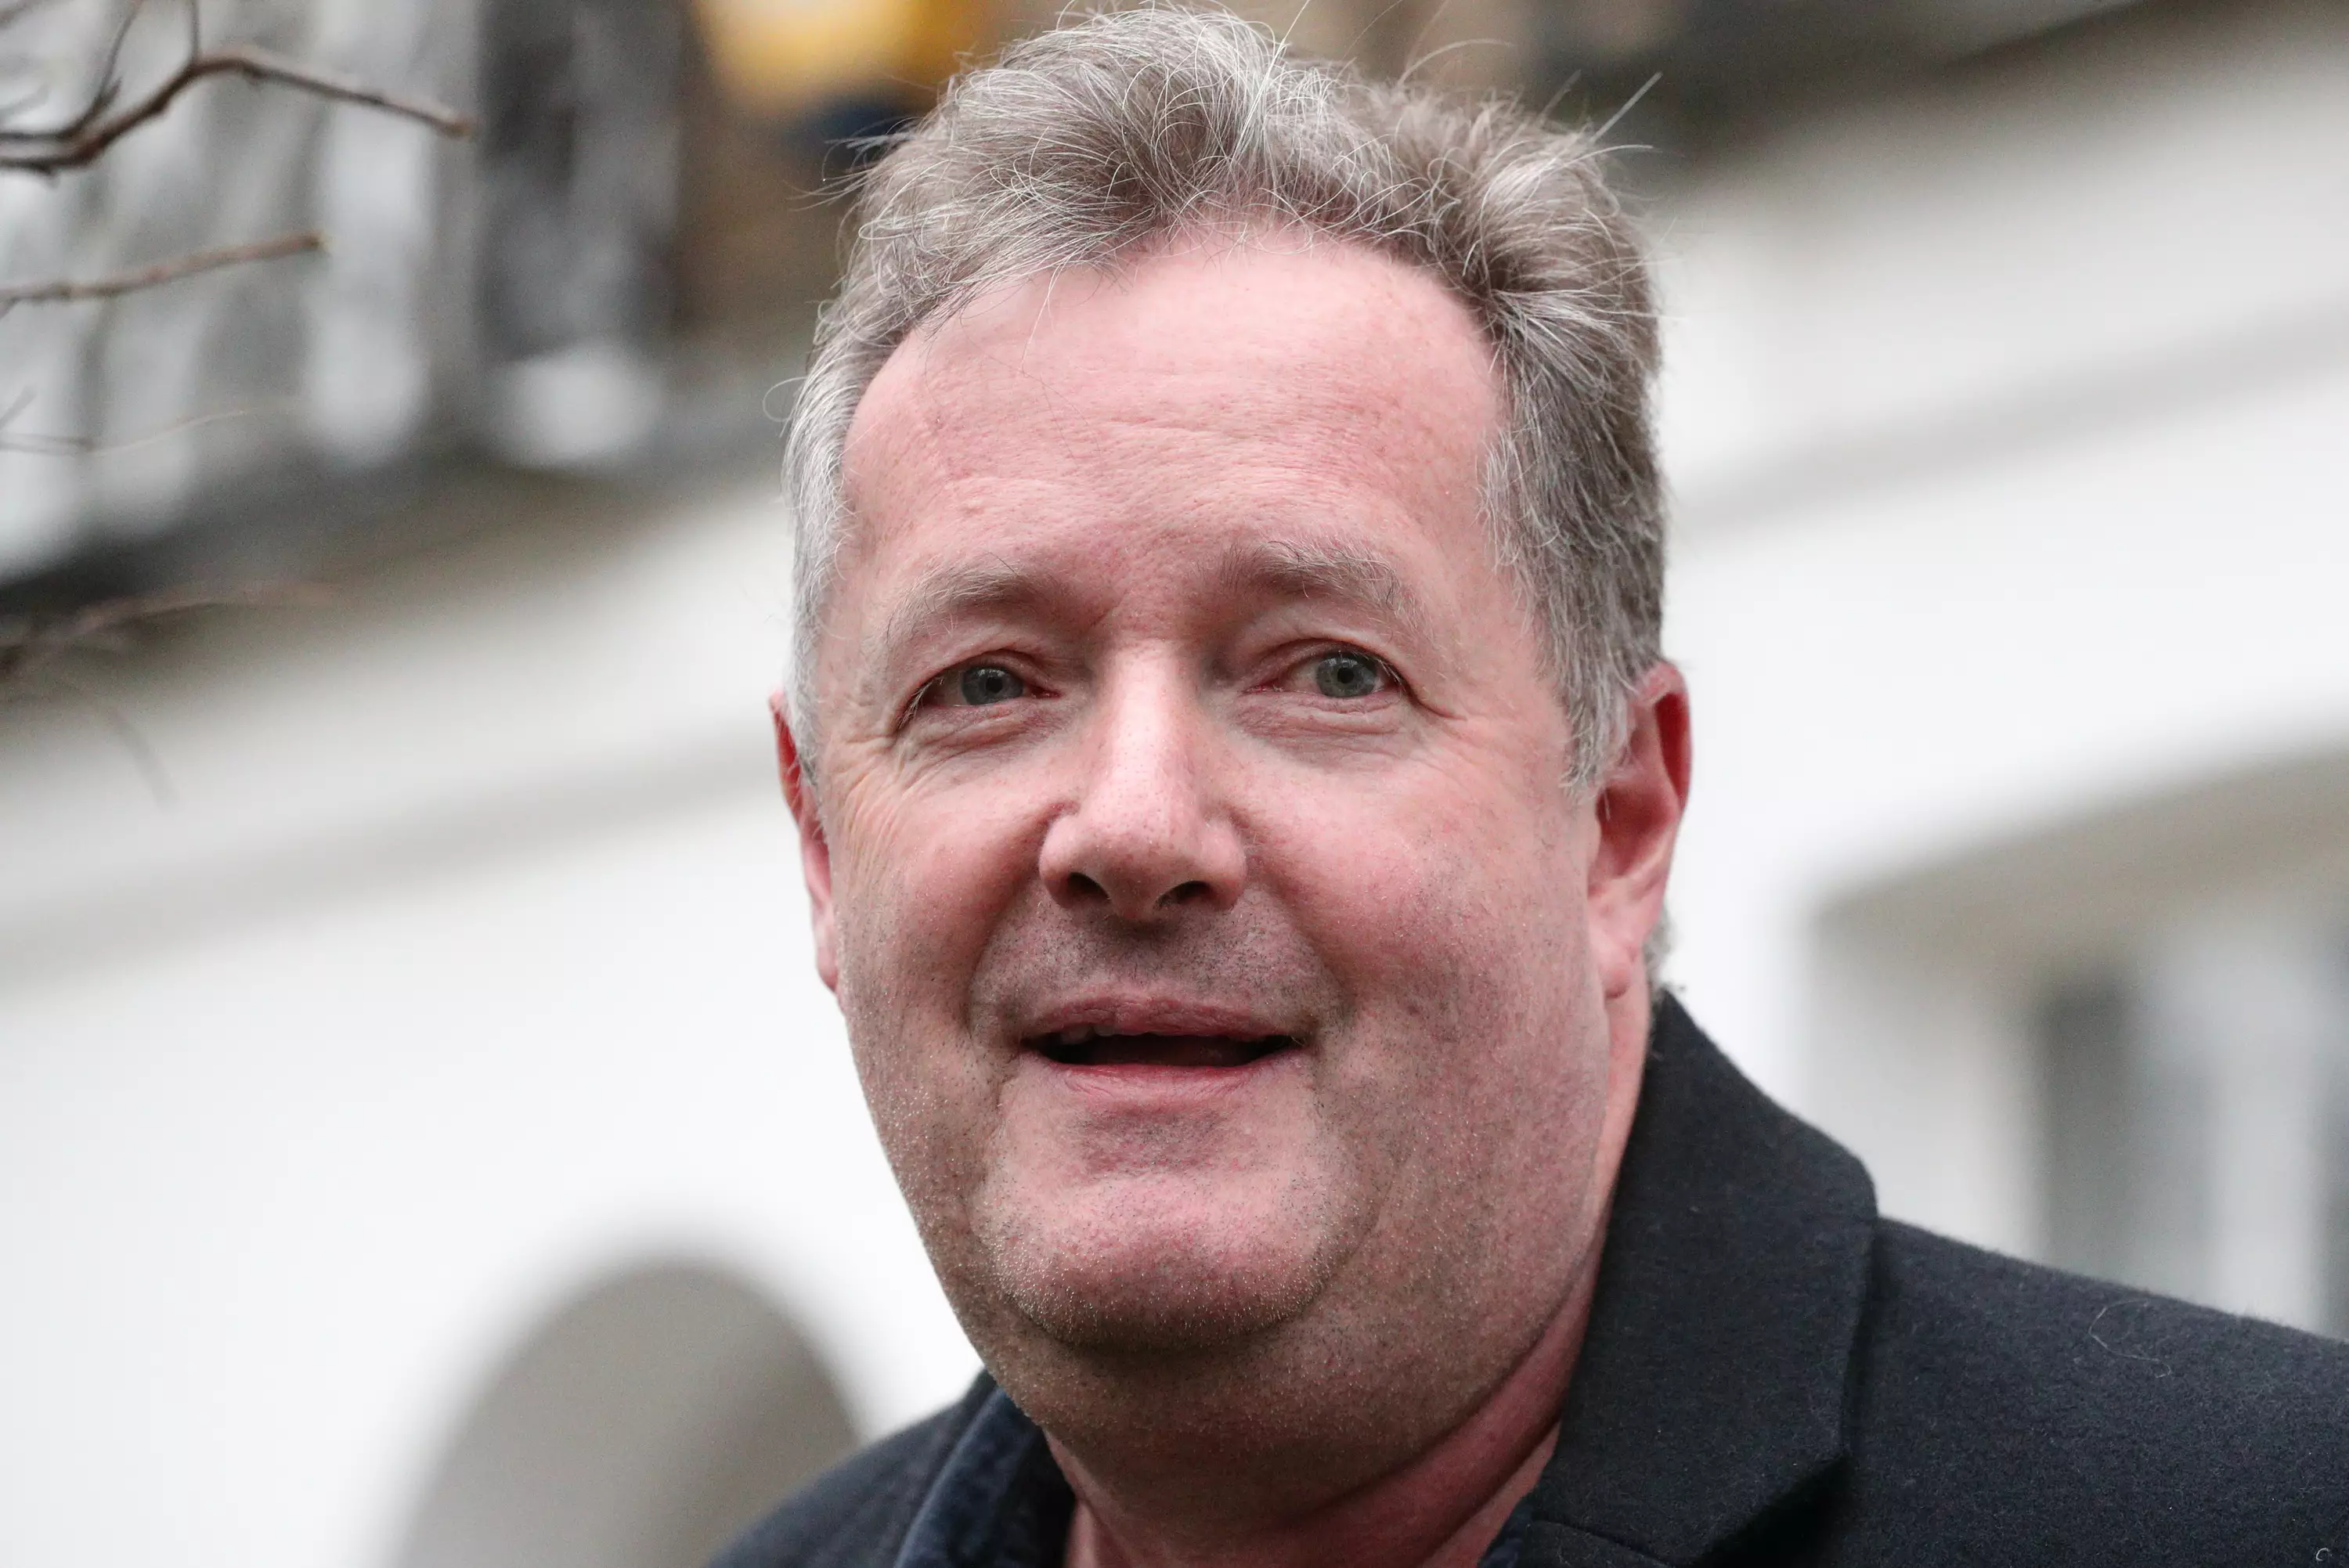 Piers Morgan has criticised Emily on social media before (